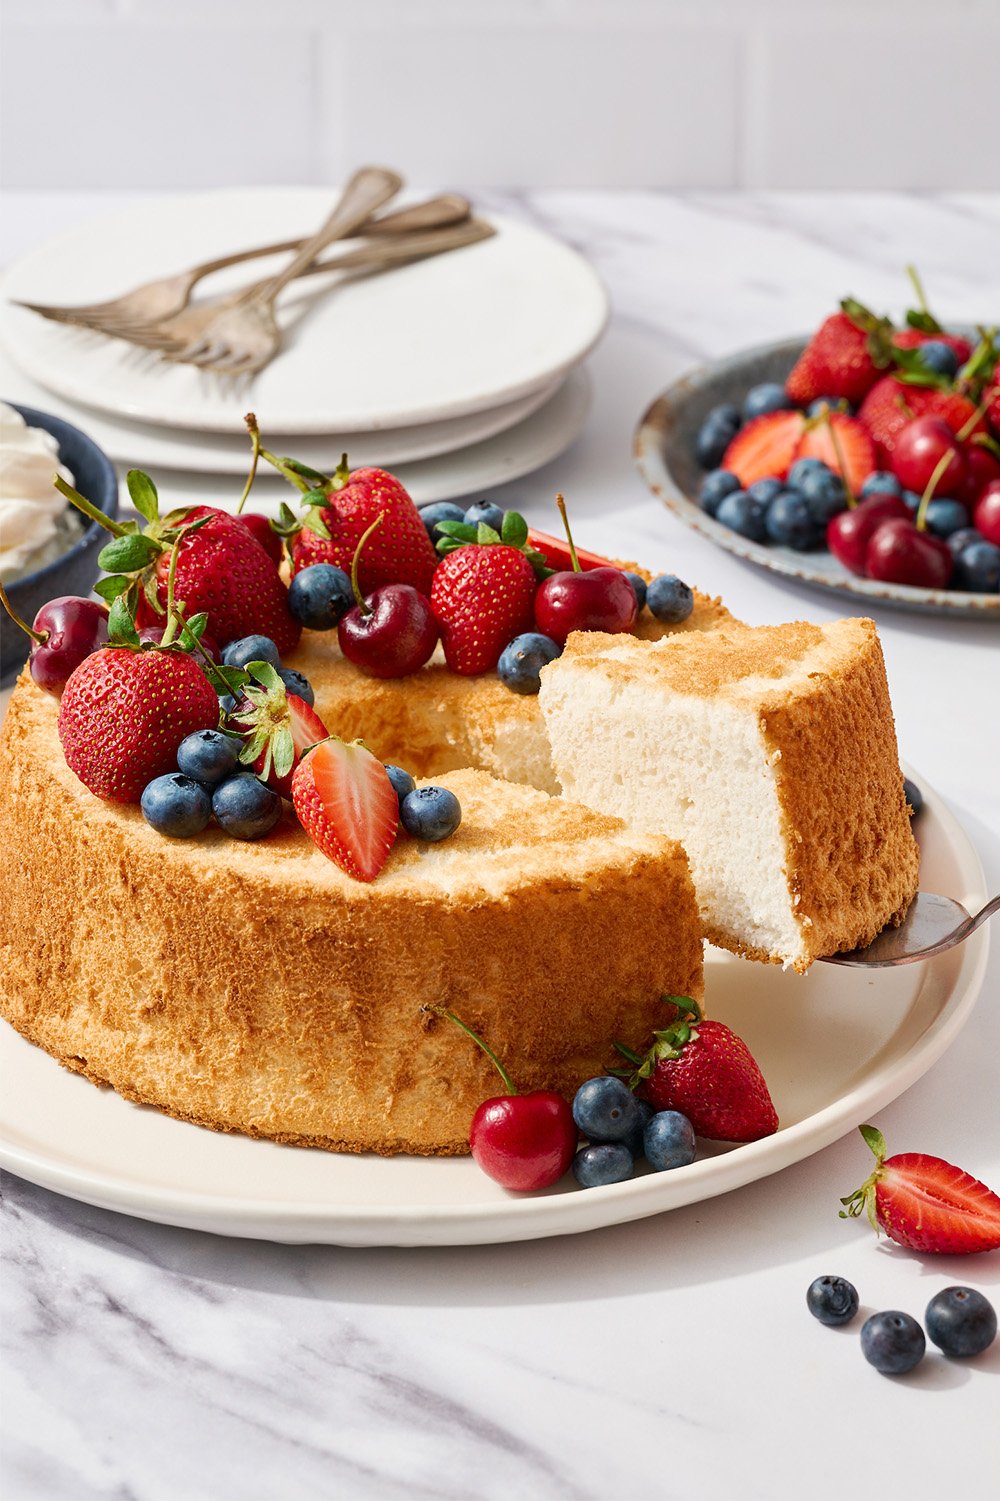 Tips for Making an Angel Food Cake